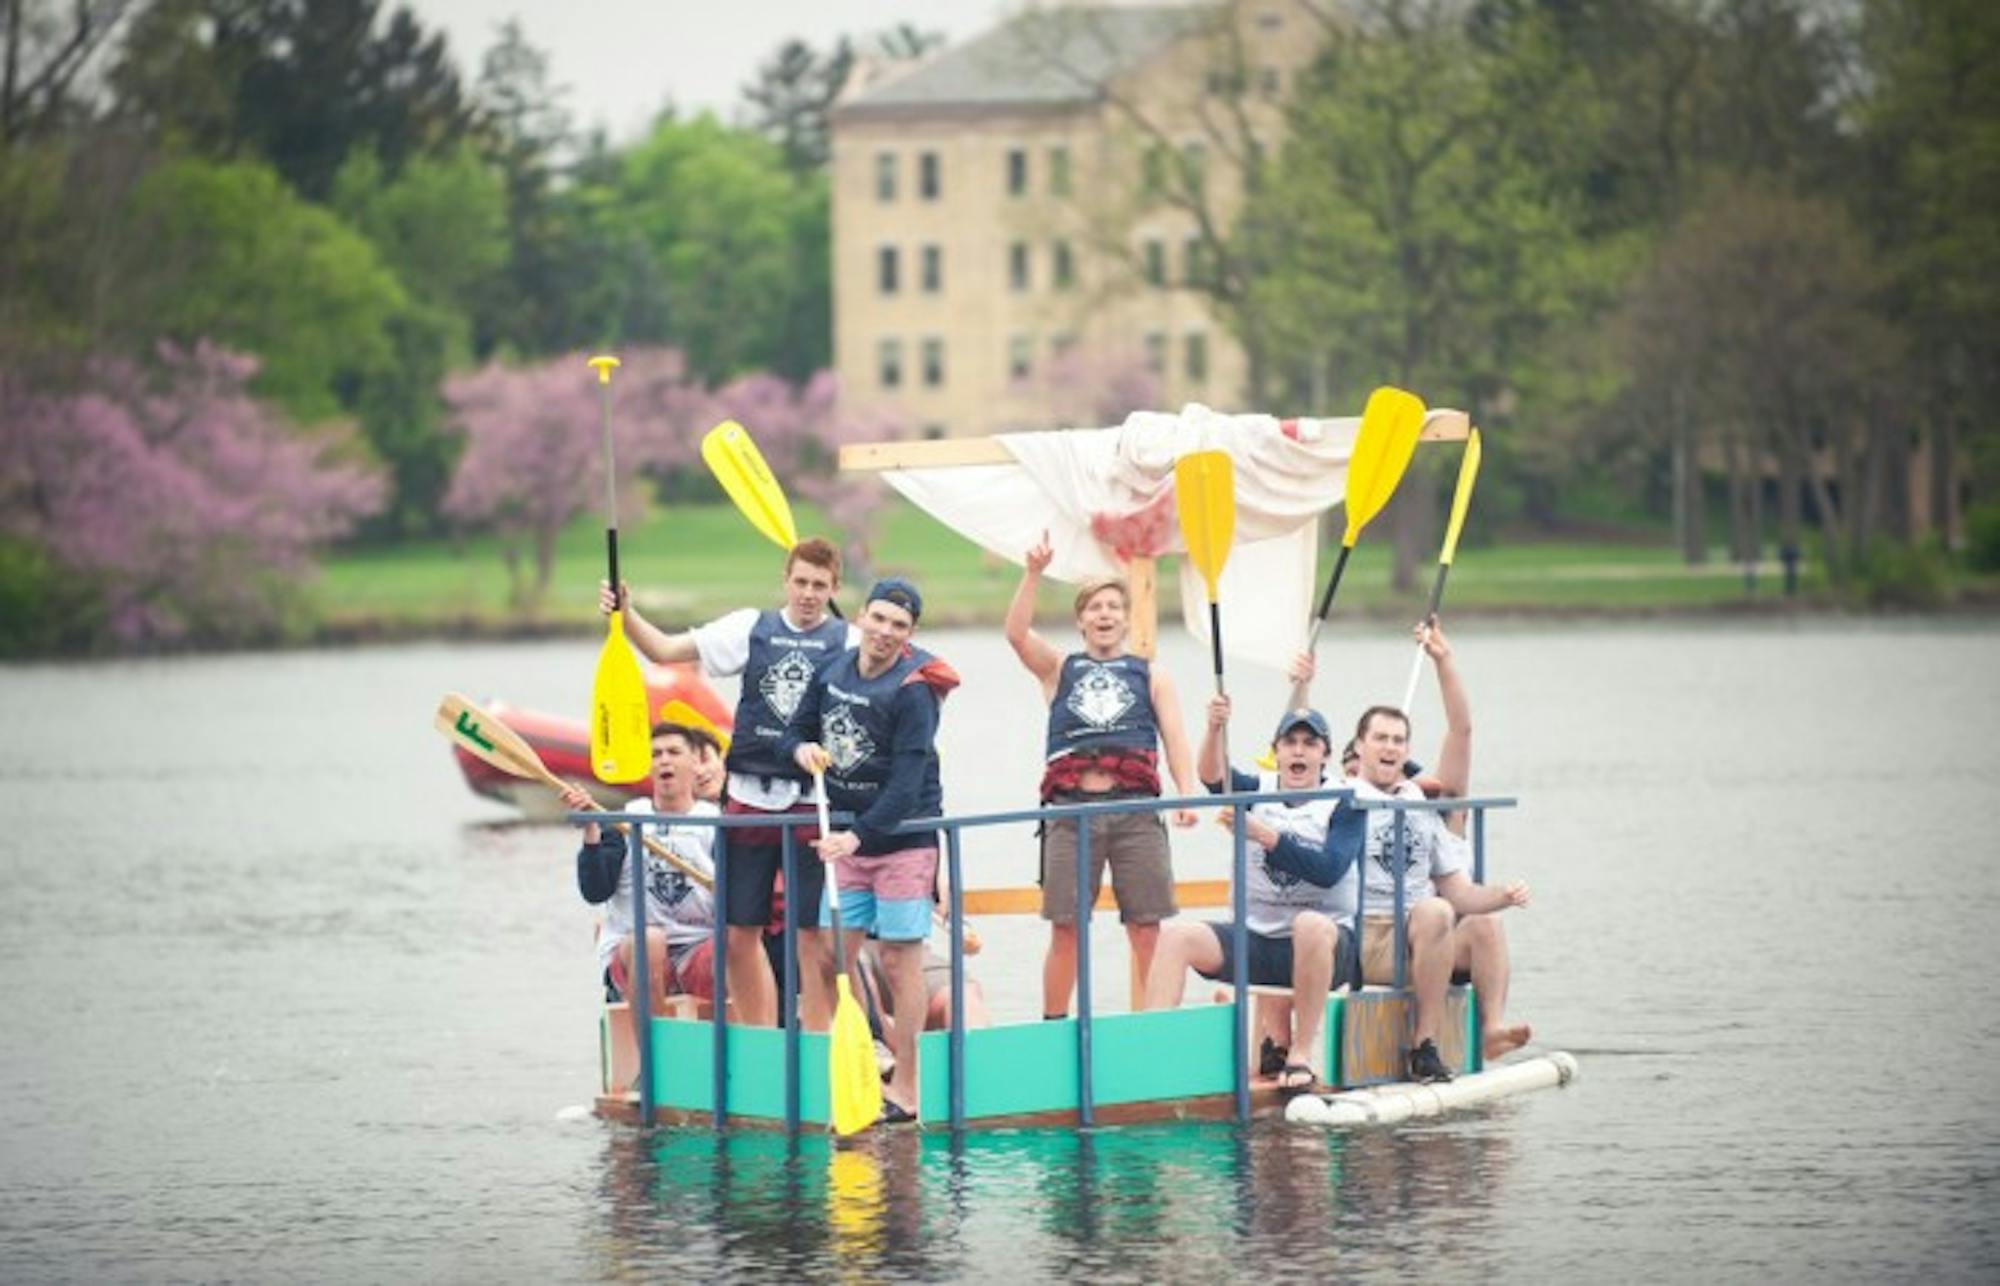 Participants travel across St. Mary's Lake during Saturday's event. A team of freshmen from Fisher Hall won this year's Fisher Regatta with their boat